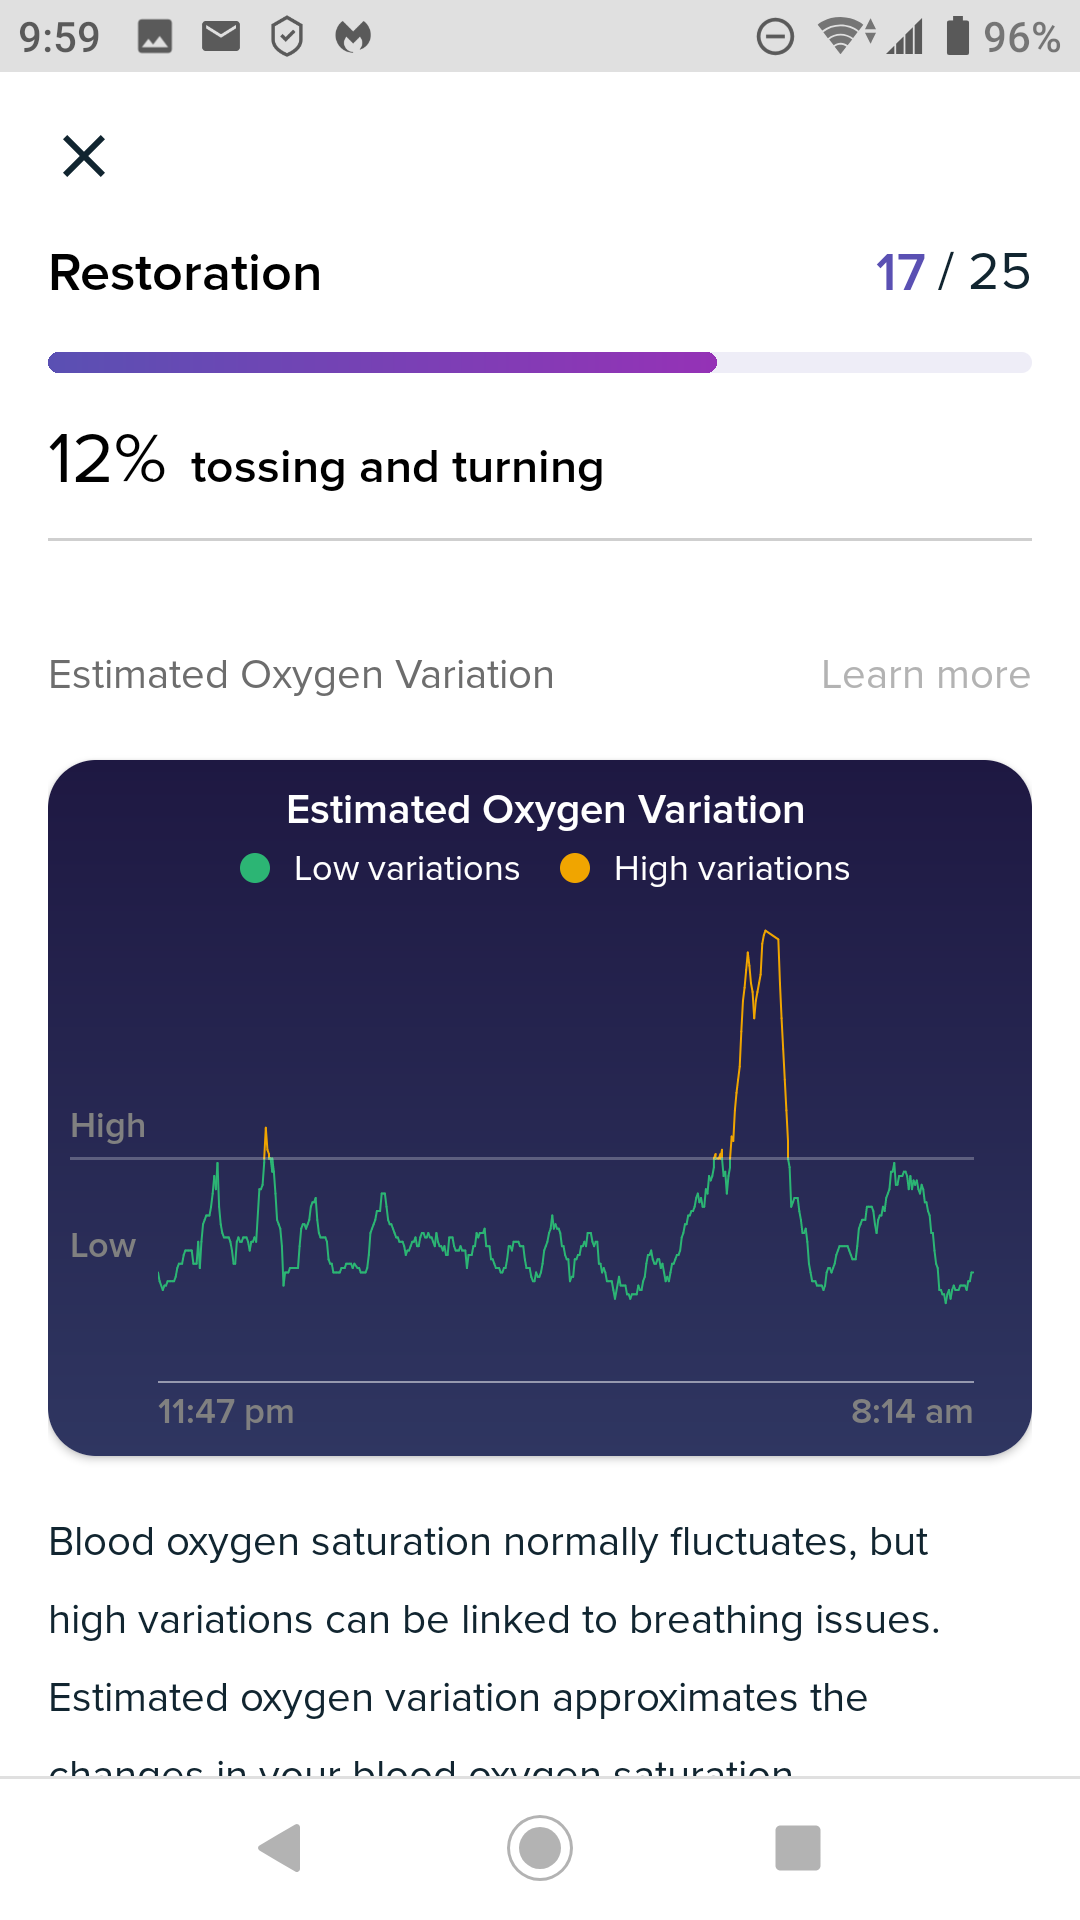 Solved: Estimated Oxygen Variability is 